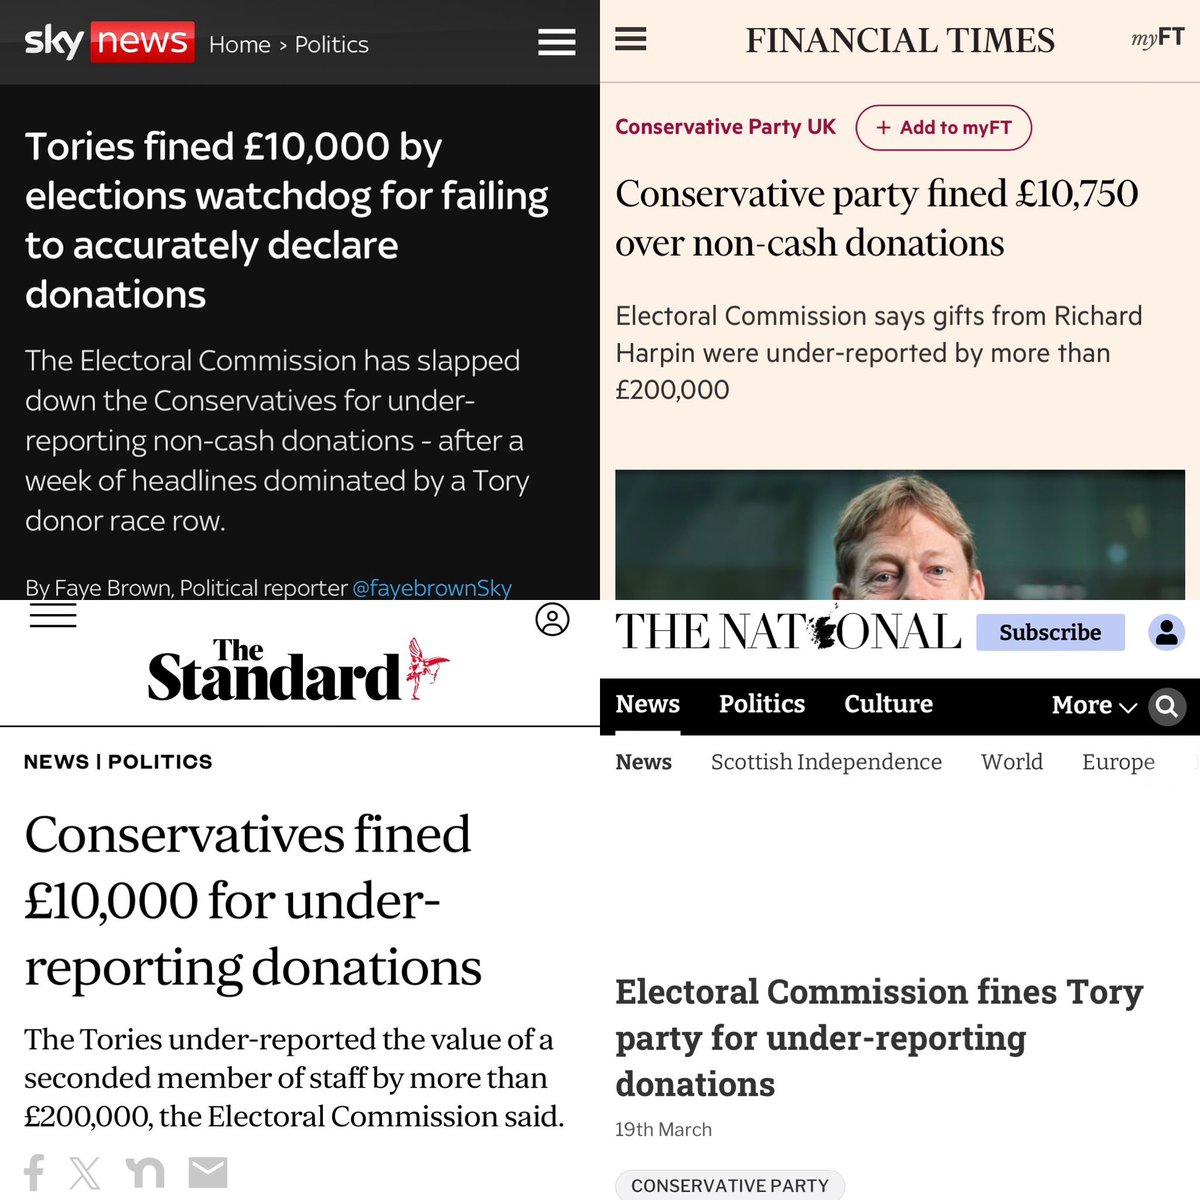 Numerous article from the BBC on Rayner… Including one from Kuenssberg that says: “with the police investigating, Angela Rayner is in trouble.” Yet zero articles on Conservative Party being fined by the Electoral Commission for underreporting donations Why is that @BBCNews?